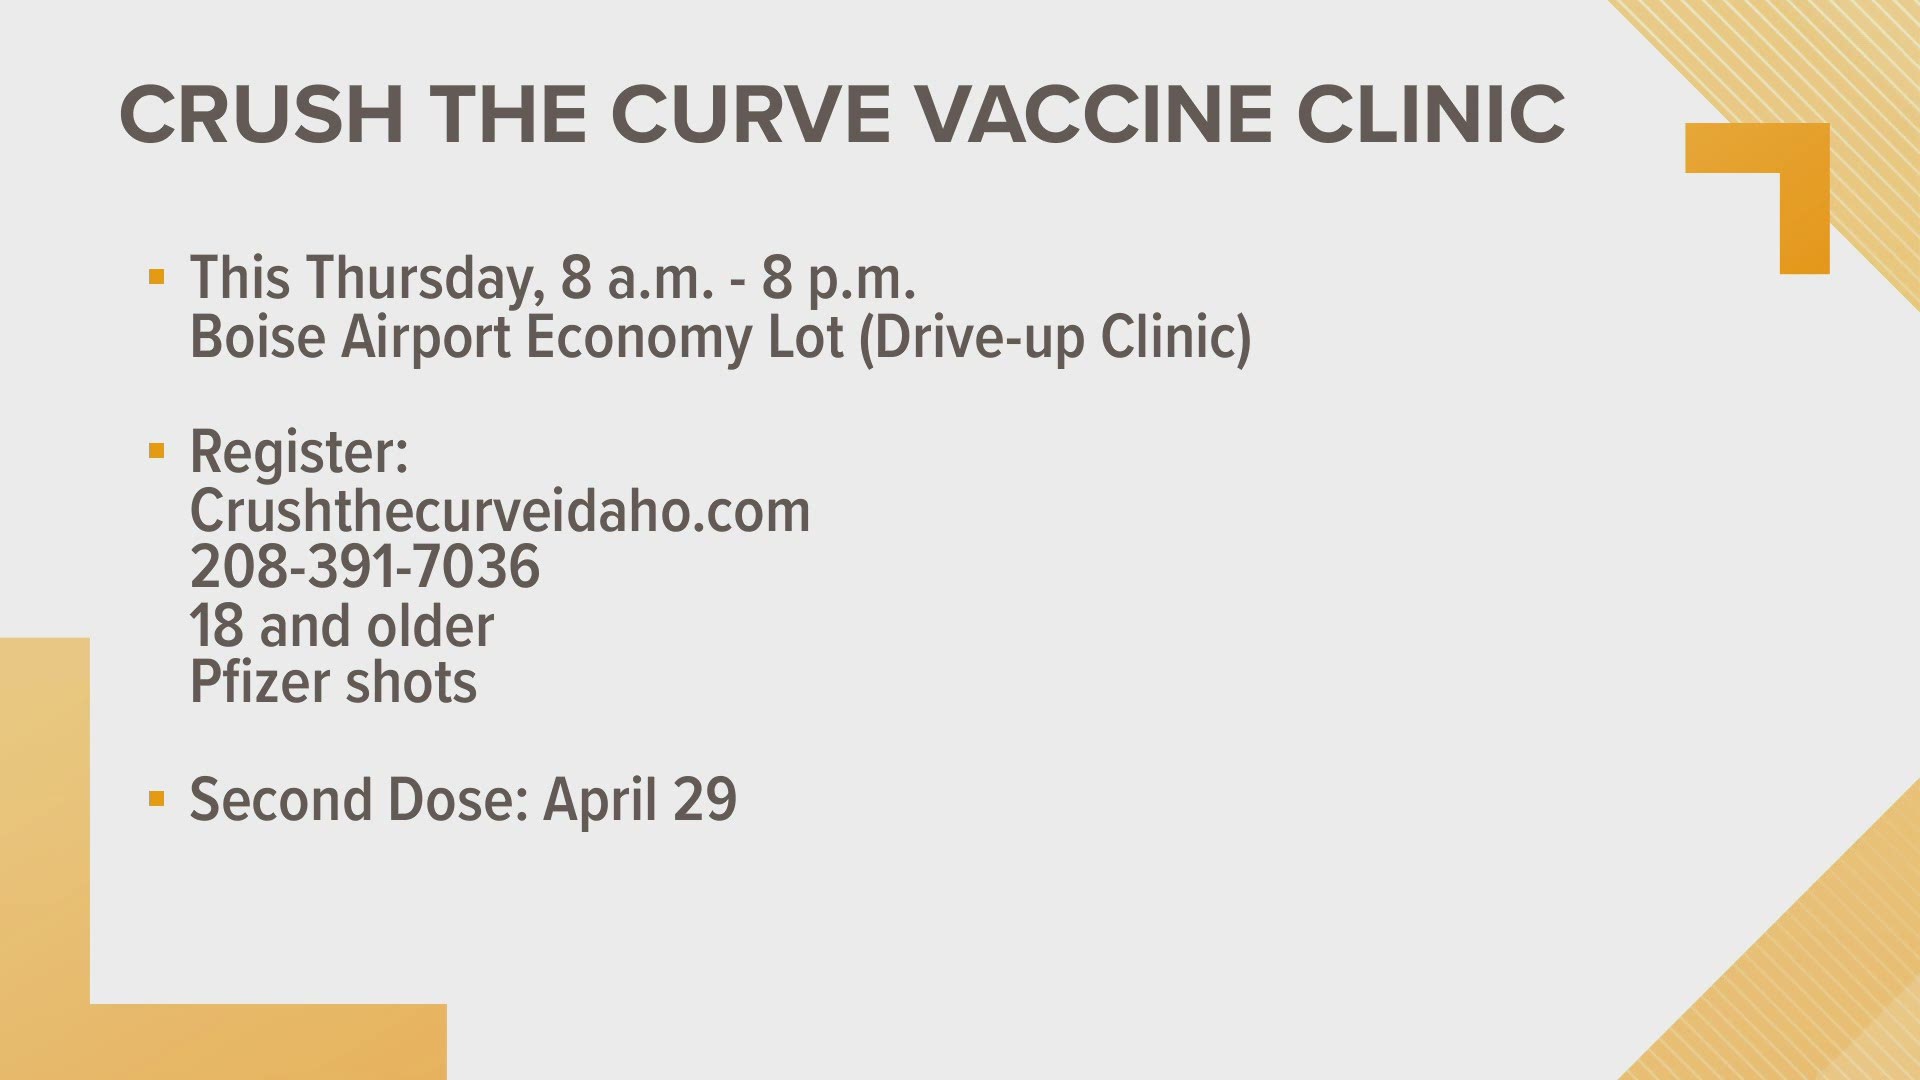 Crush the Curve Idaho will hold the state's largest vaccination clinic at the Boise Airport Economy Parking Lot on Thursday, April 8.